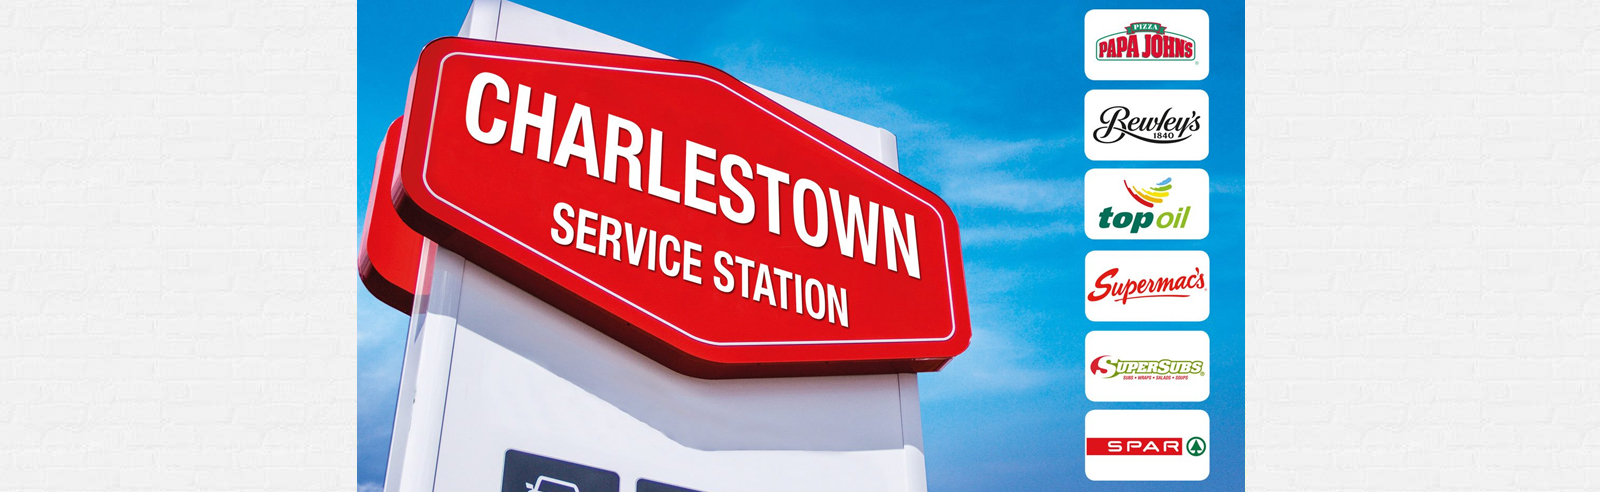 Charlestown Service Station, Official Opening